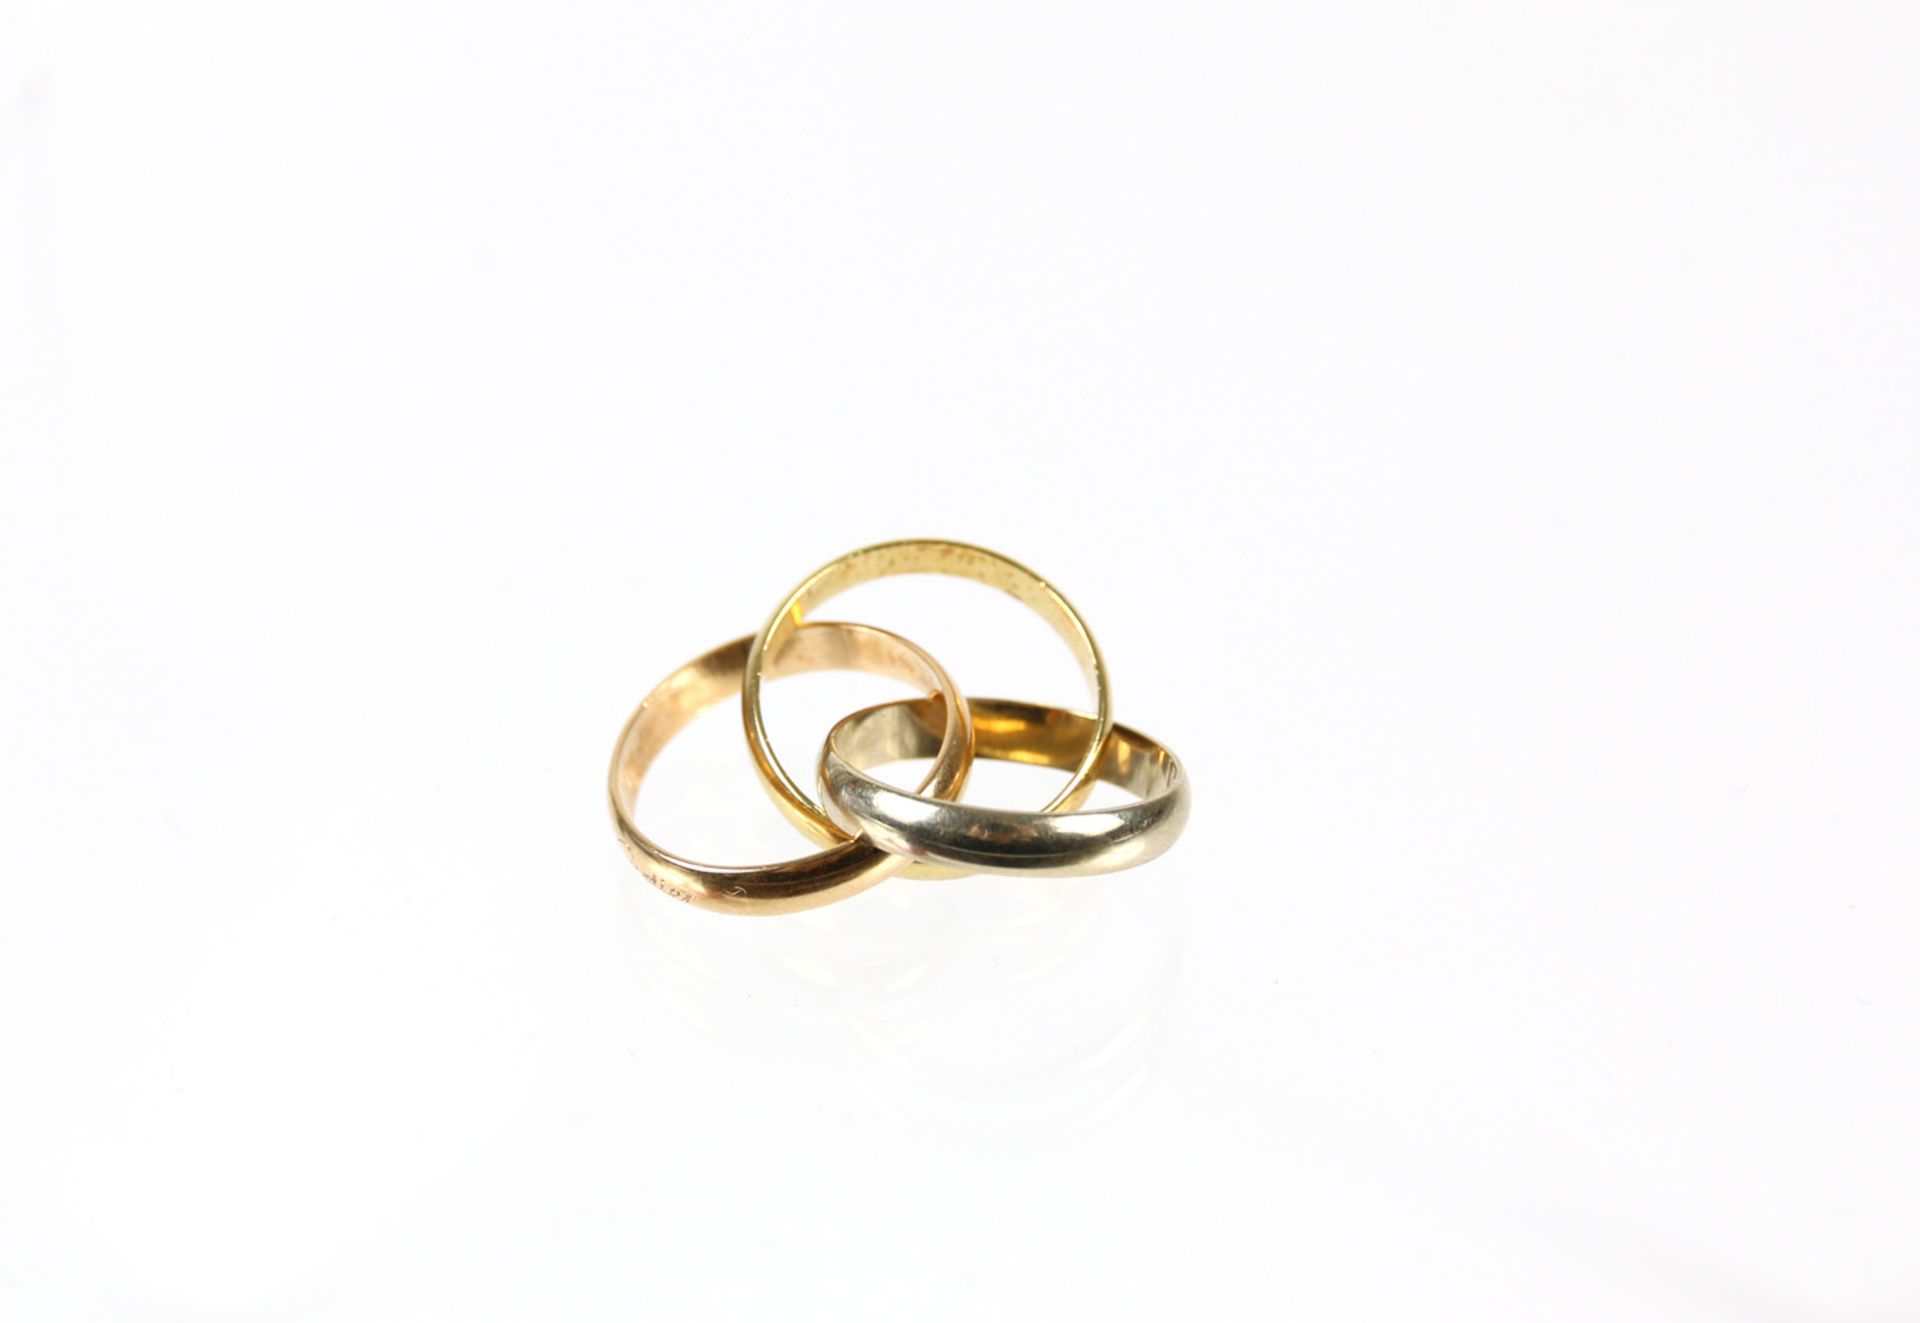 Cartier Ring "Trinity" - Image 5 of 6